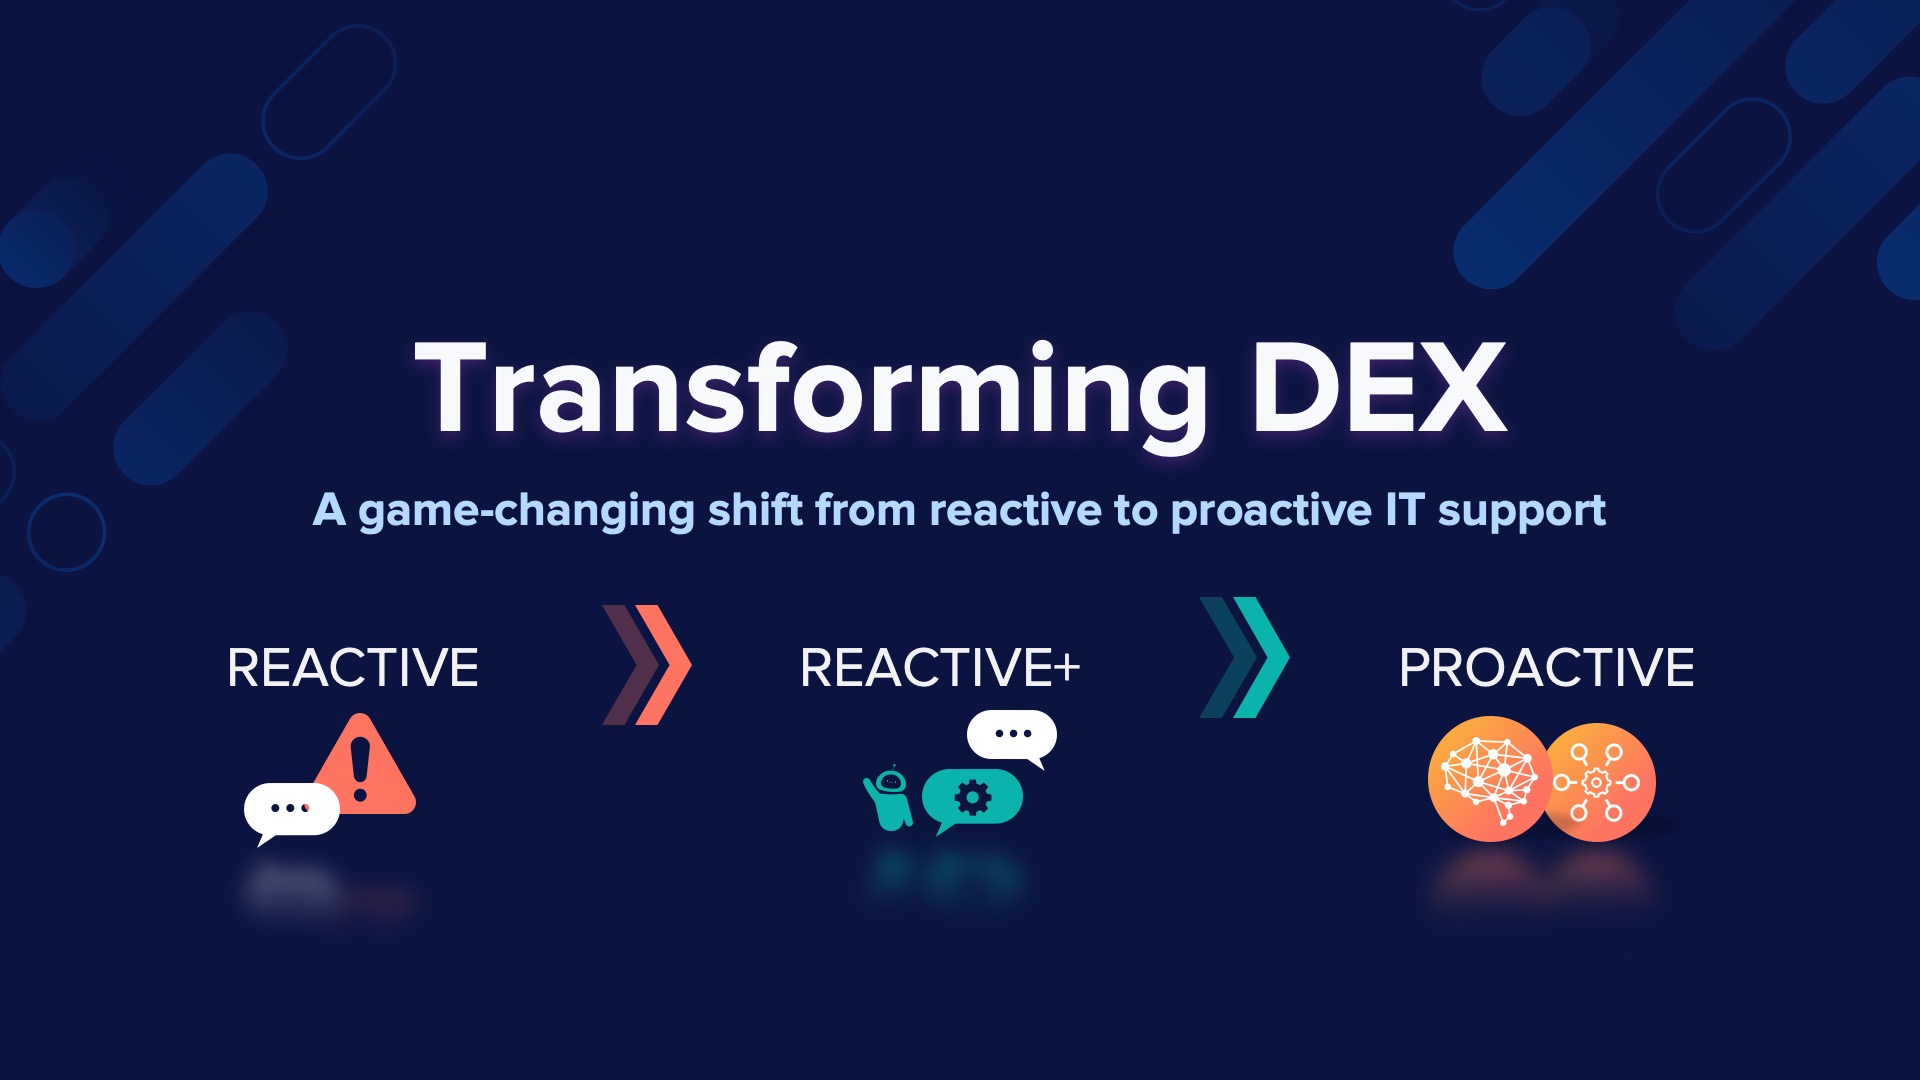 A slide design from the Nexthink Experience everywhere event. It shows three stages of transforming DEX going from reactive to reactive plus to proactive.